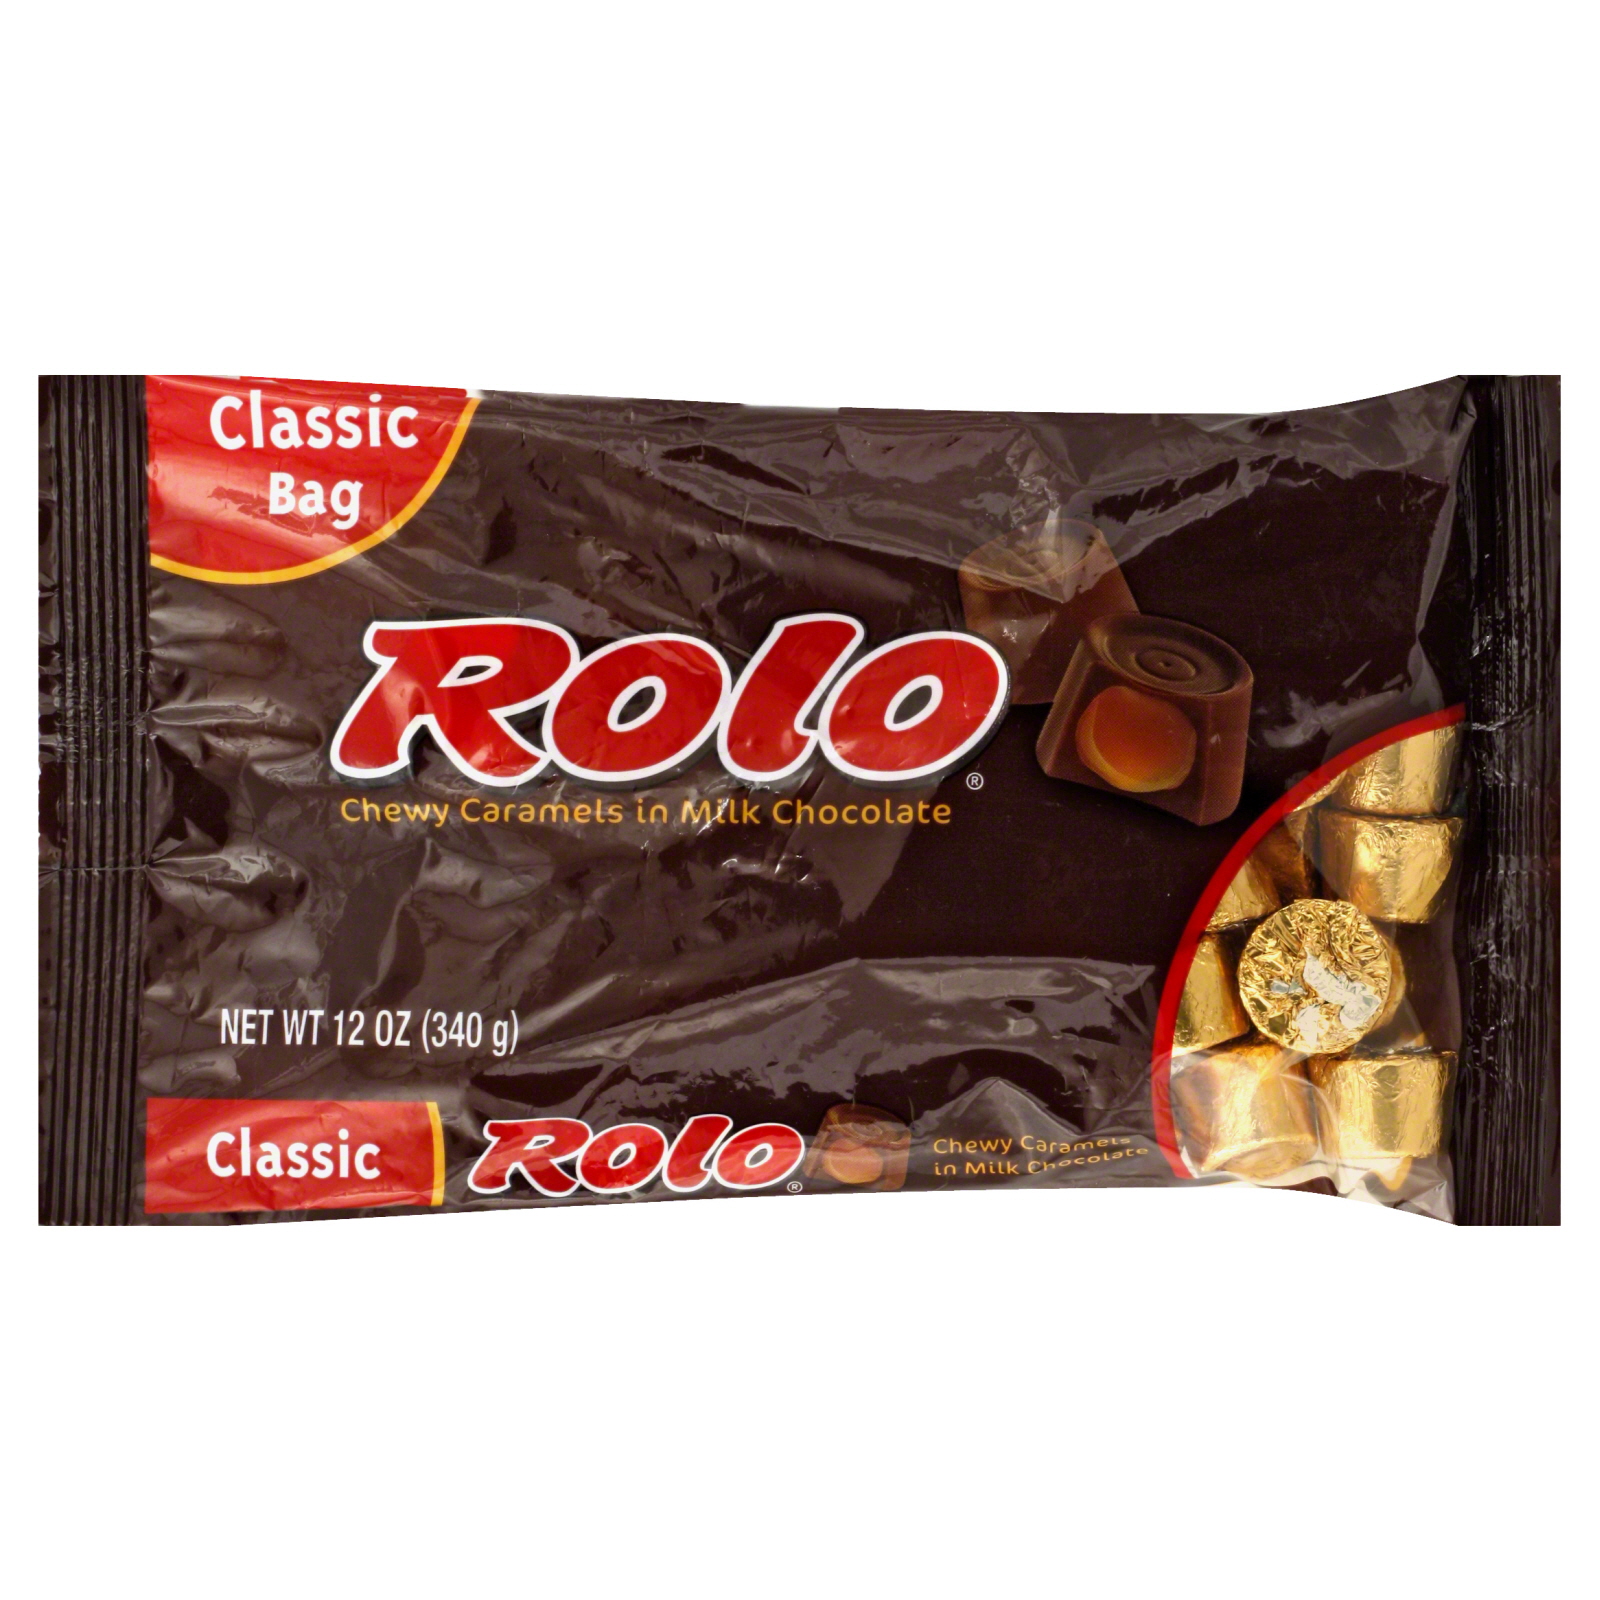 Rolo Chewy Caramels, in Milk Chocolate, 12 oz (340 g)